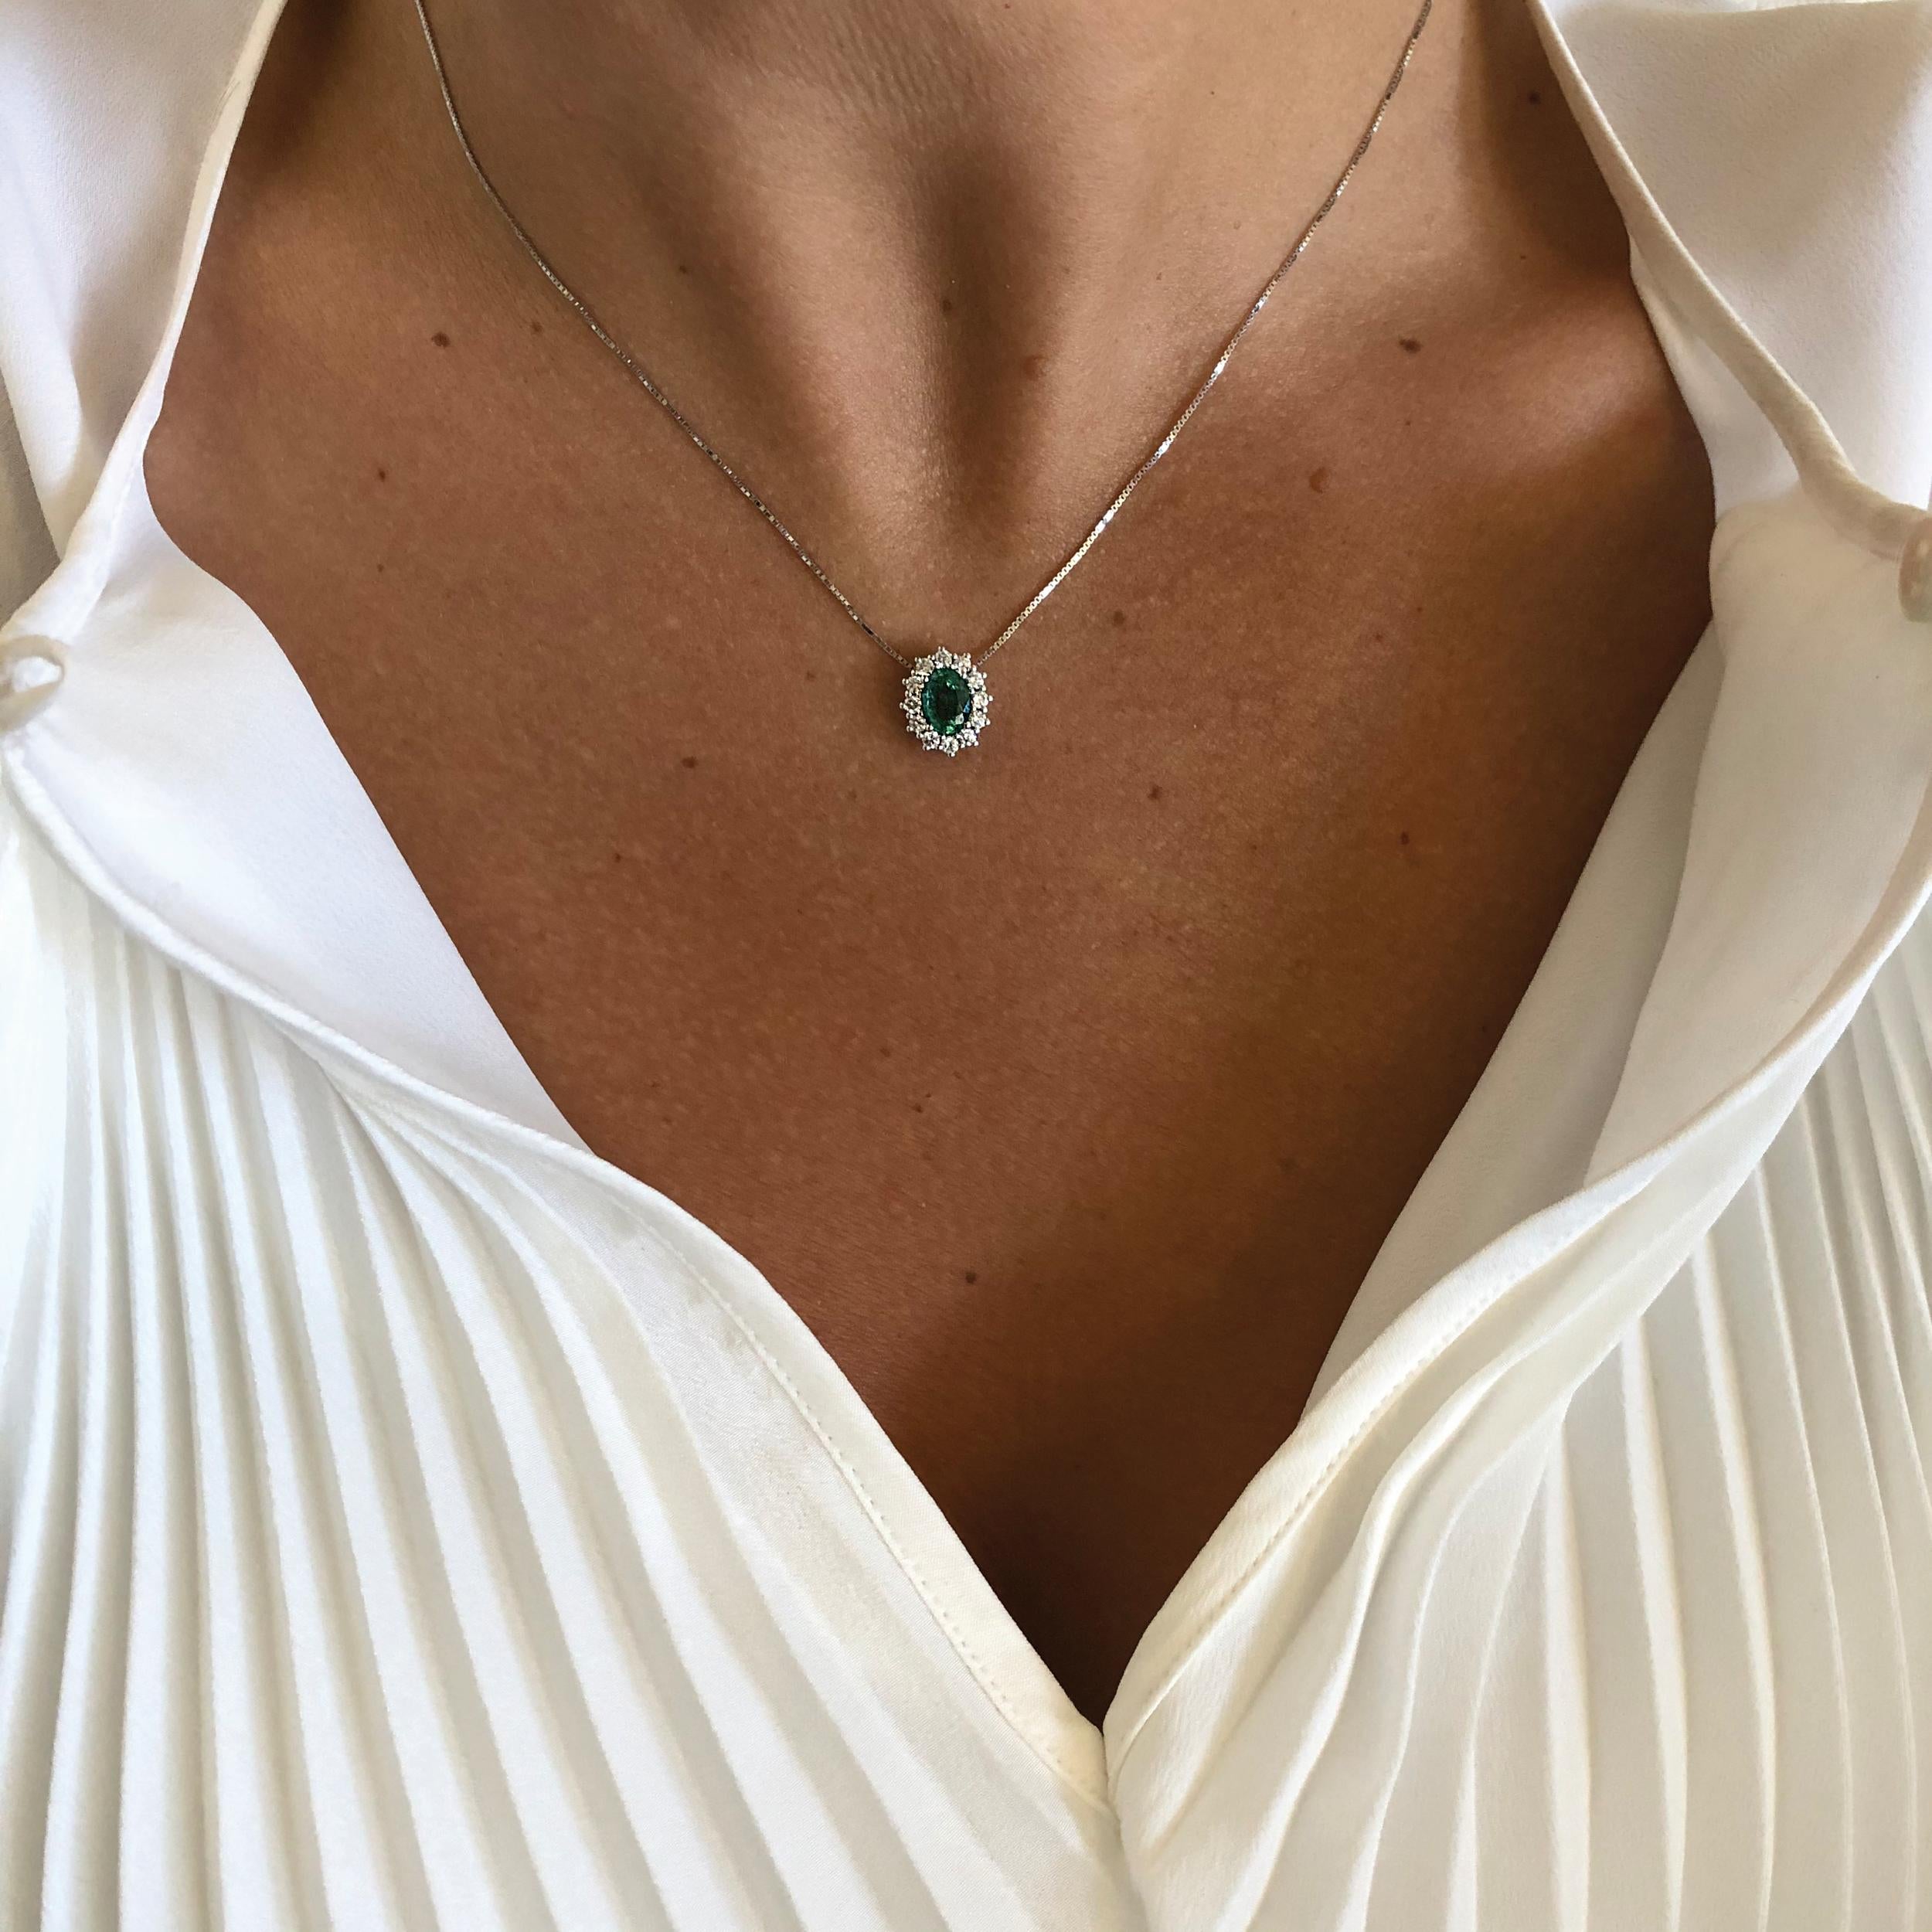 Artisan 0.76 Carat Emerald and 0.36 Carat Diamonds in 18Kt White Gold Pendant Necklace